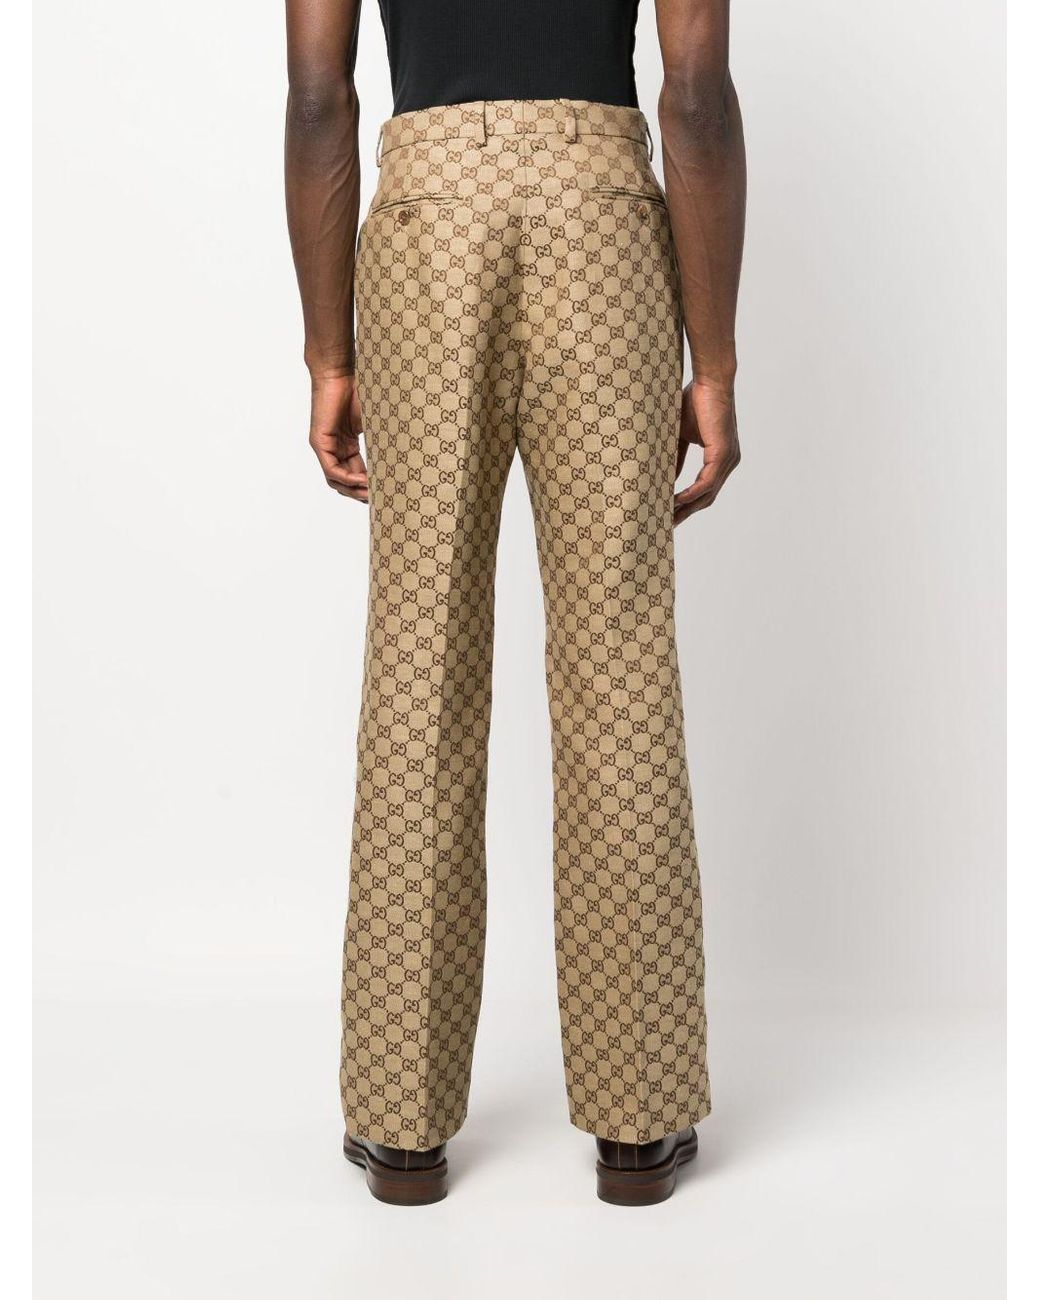 Gucci Gg Supreme Linen Trousers in Natural for Men